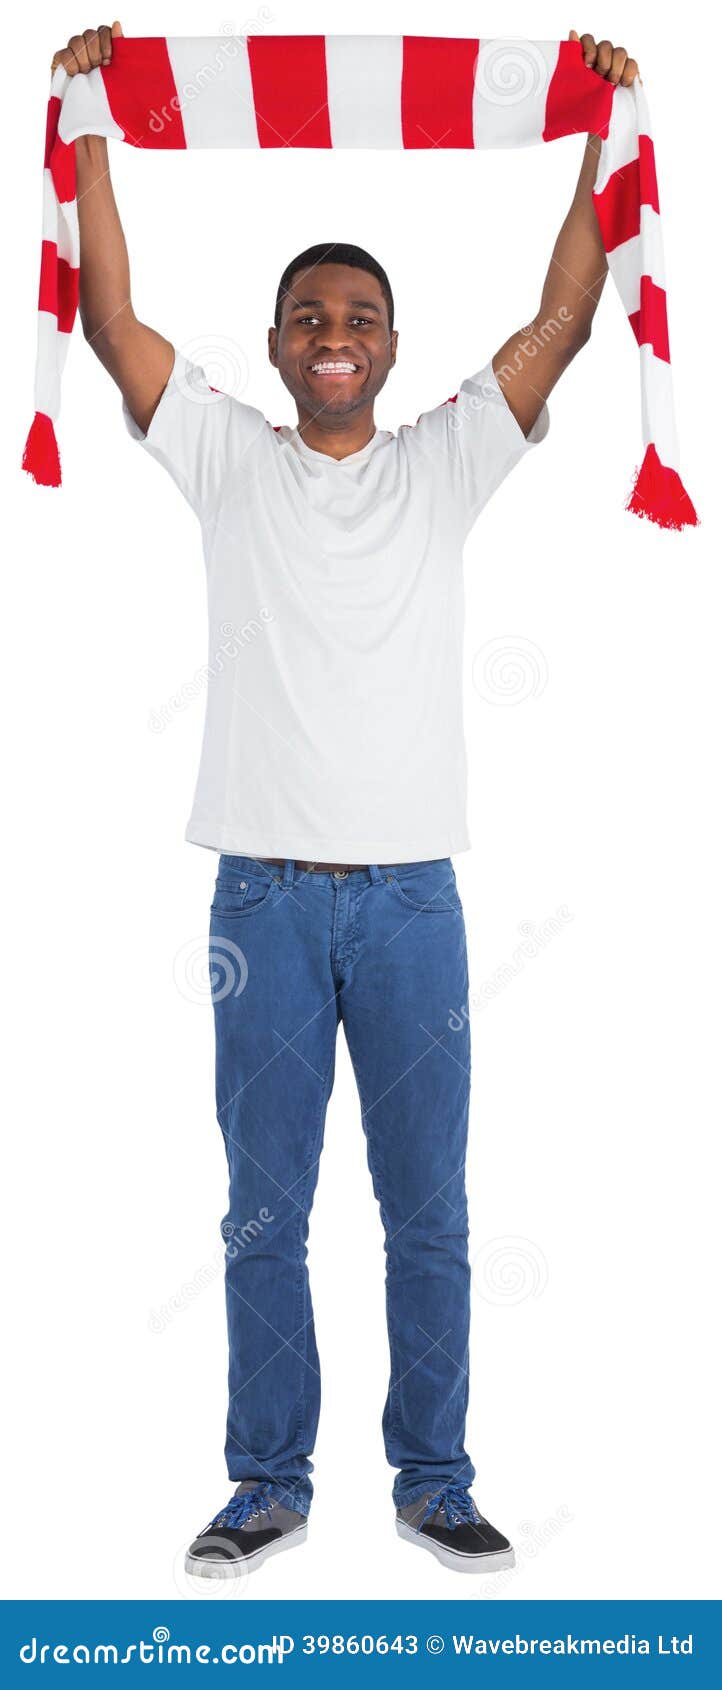 Happy Football Fan Waving Scarf Stock Image - Image of striped, white ...